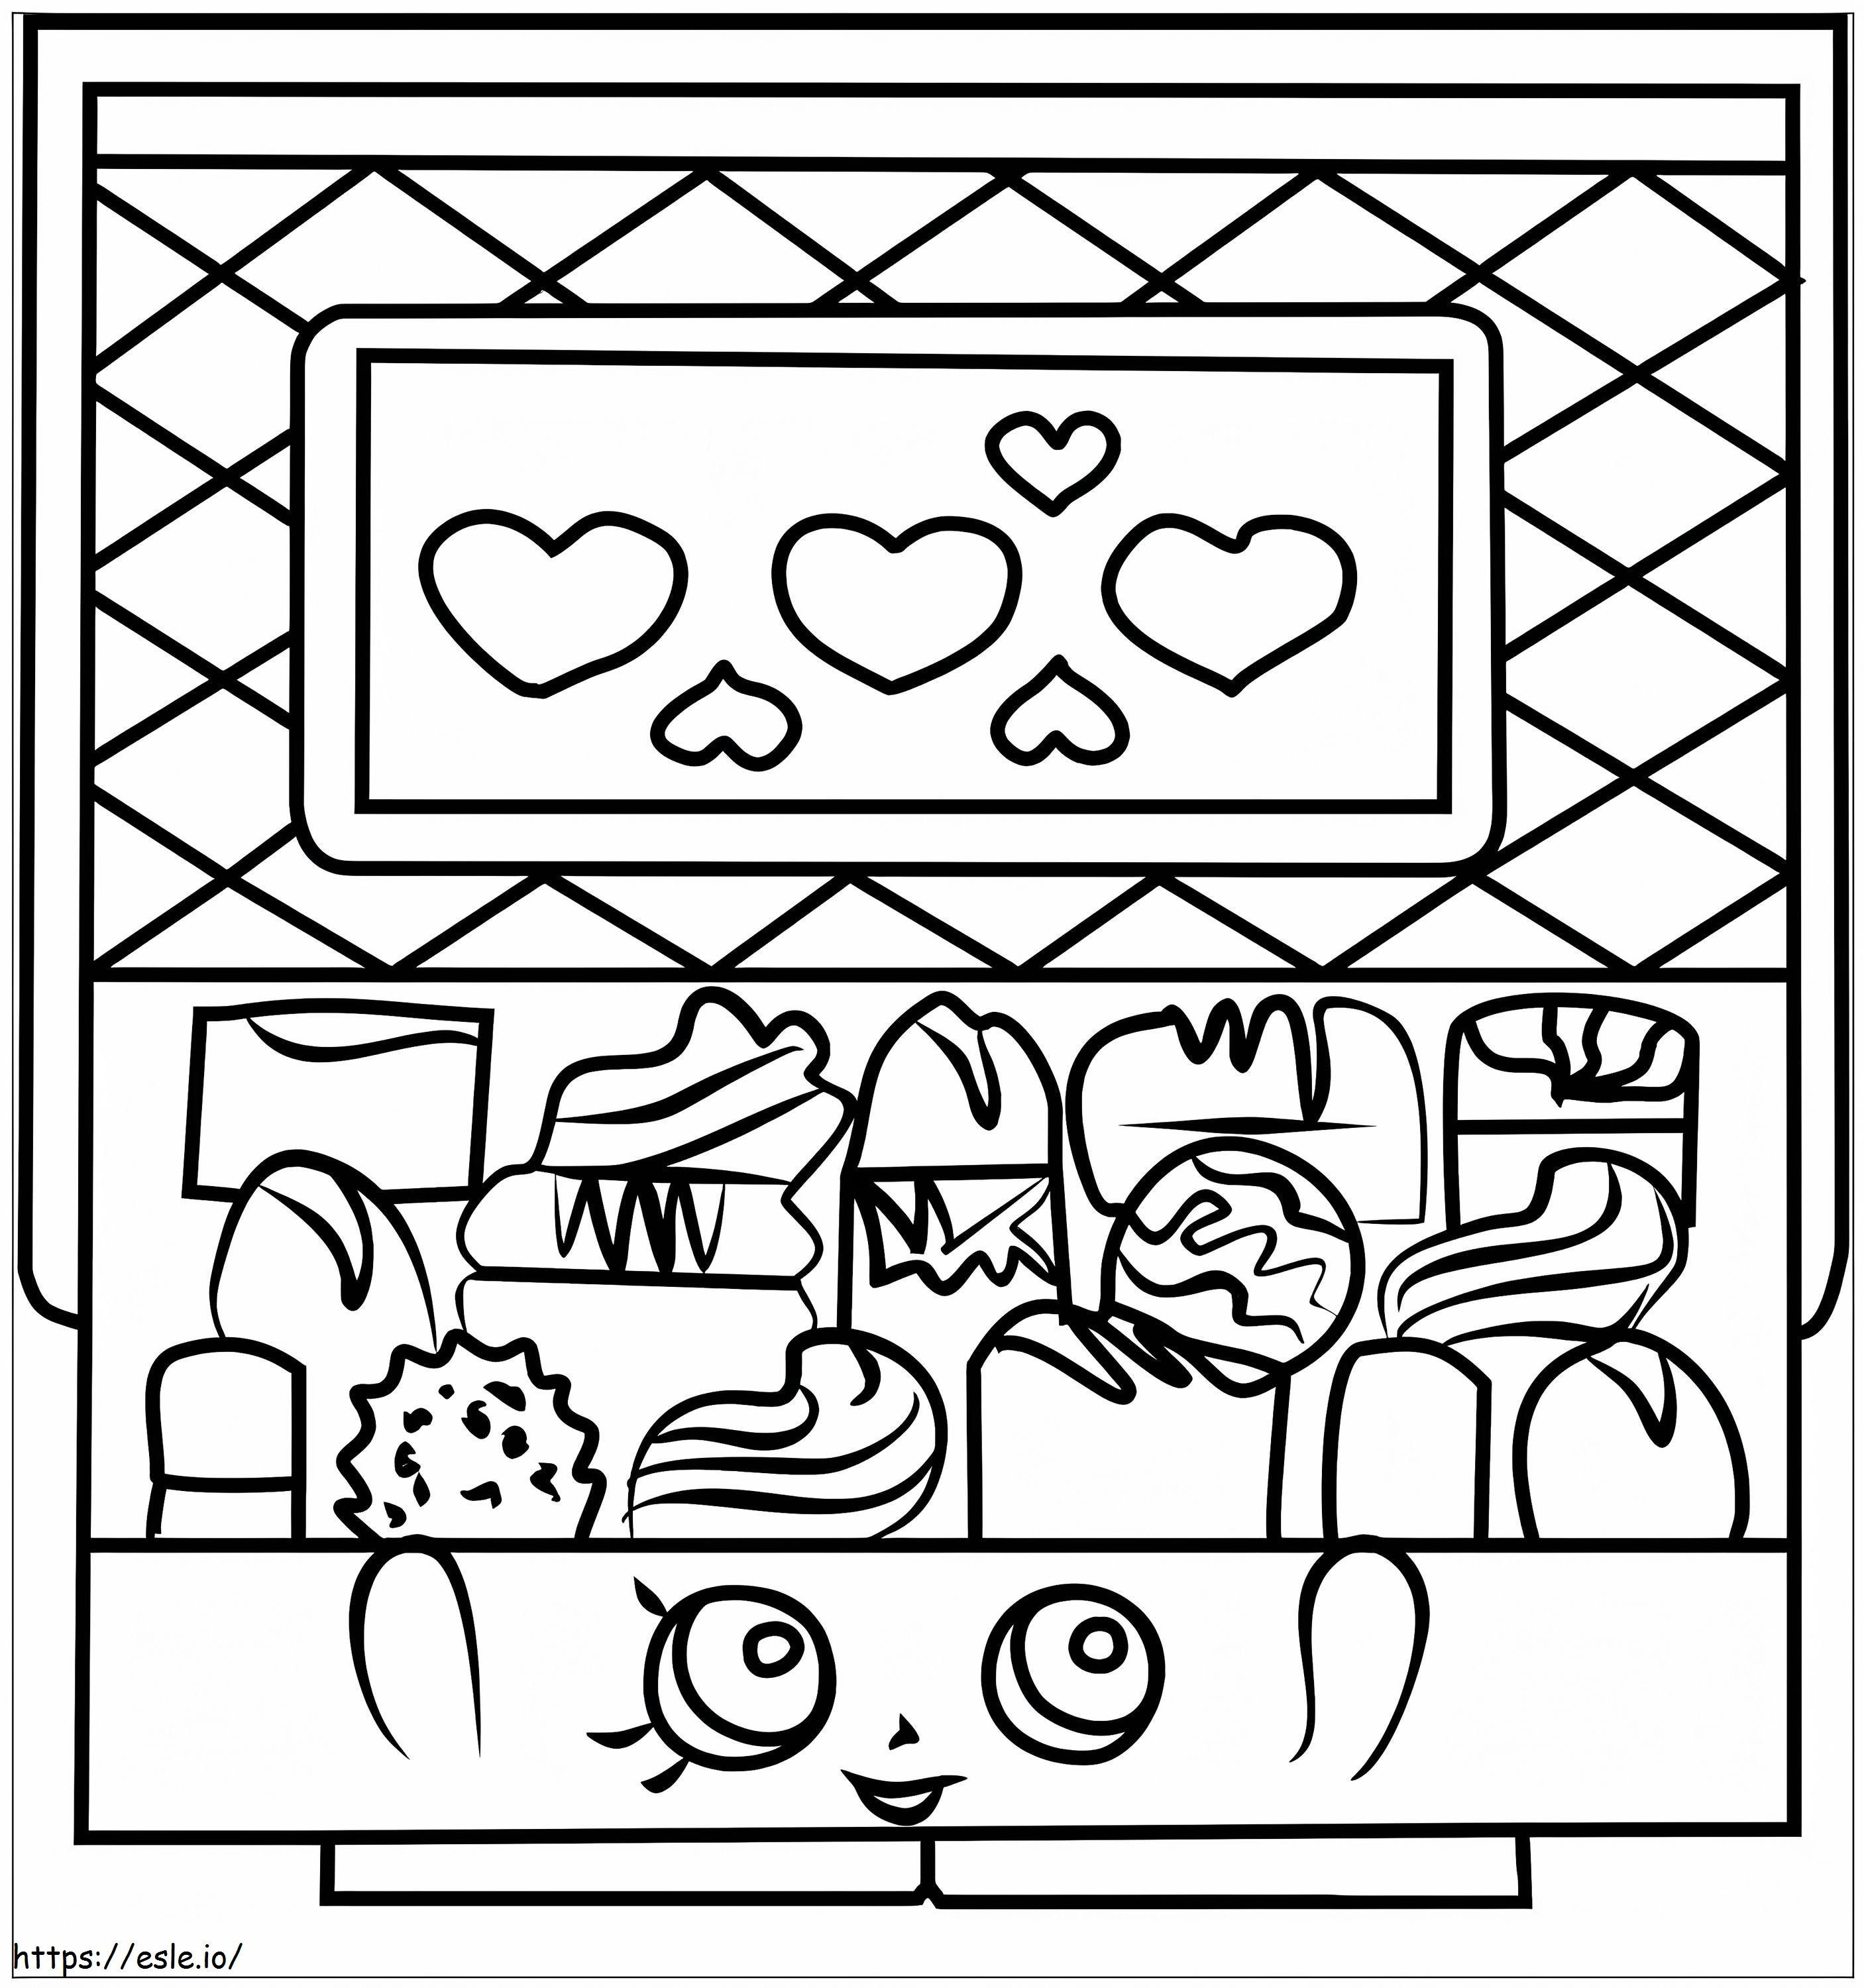 Chocky Box Shopkins coloring page